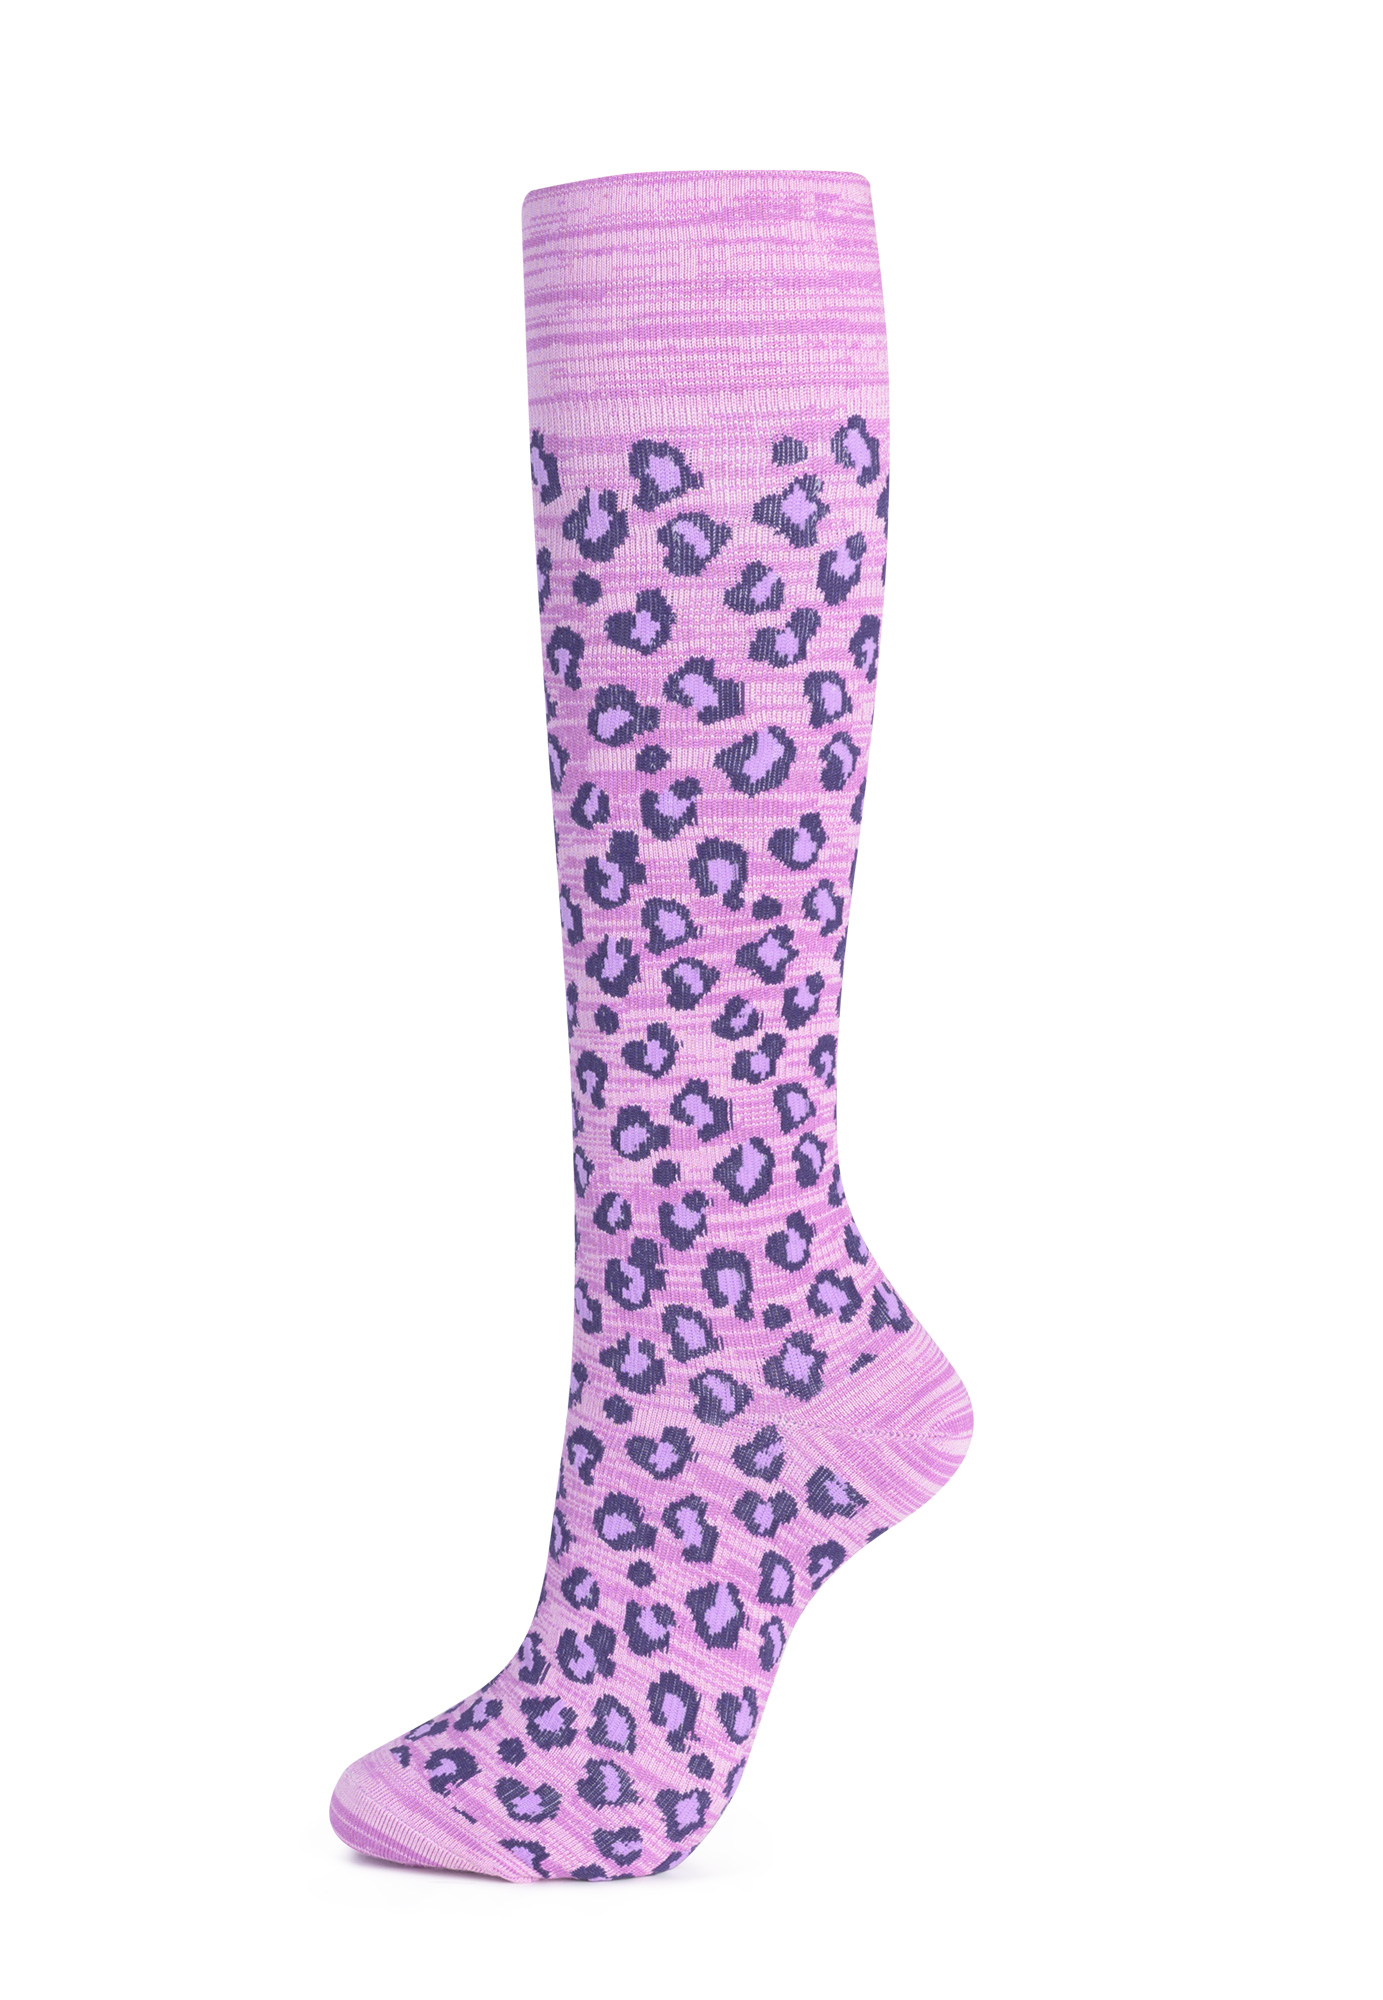 DML Skinergy Printed Compression Socks - several designs available